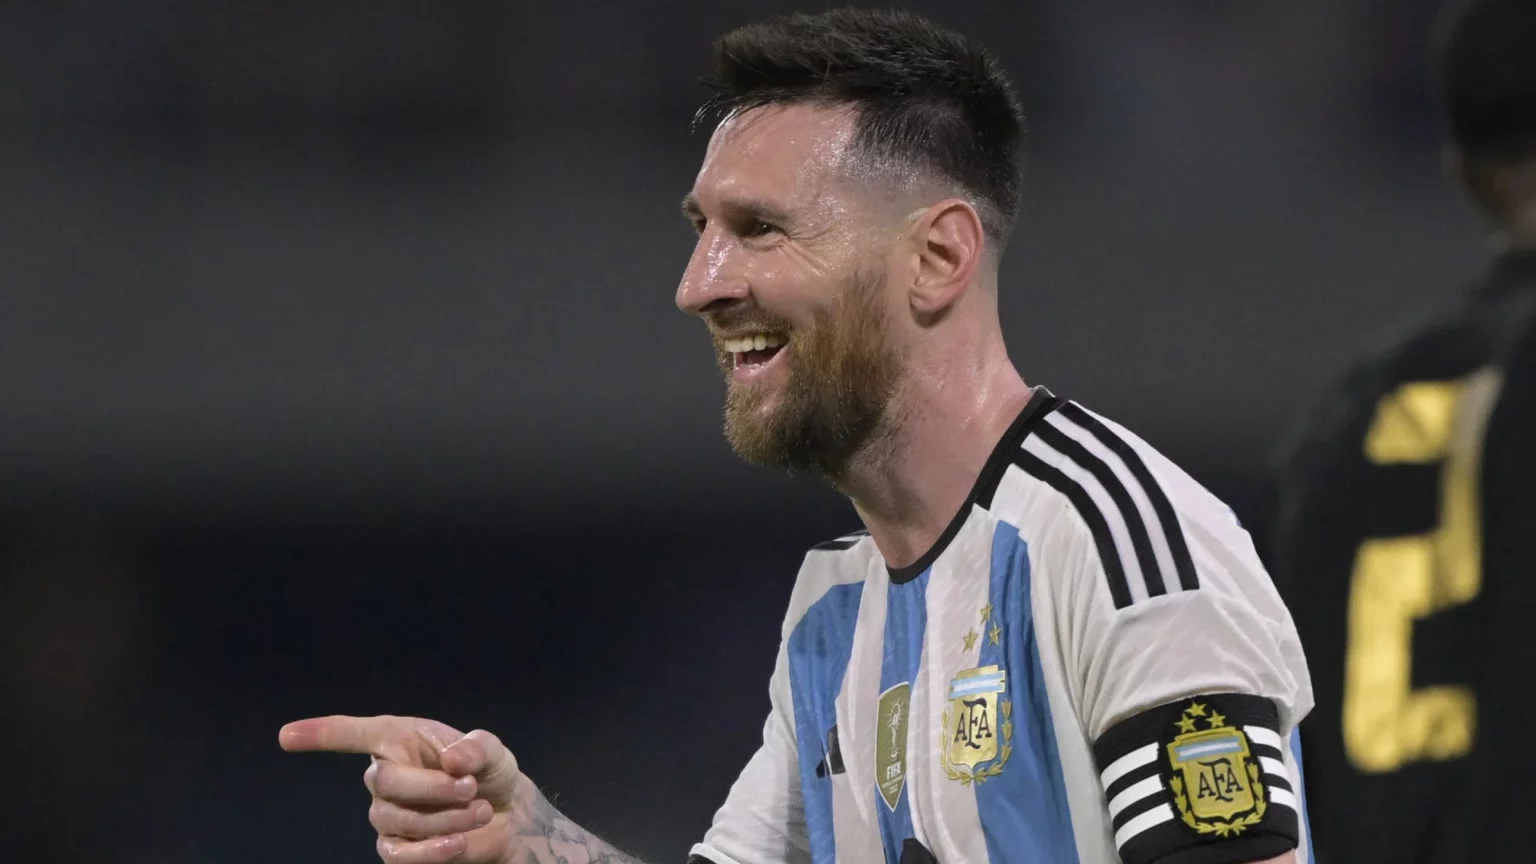 lionel-messi-scores-100th-goal-in-argentinas-win-over-curacao